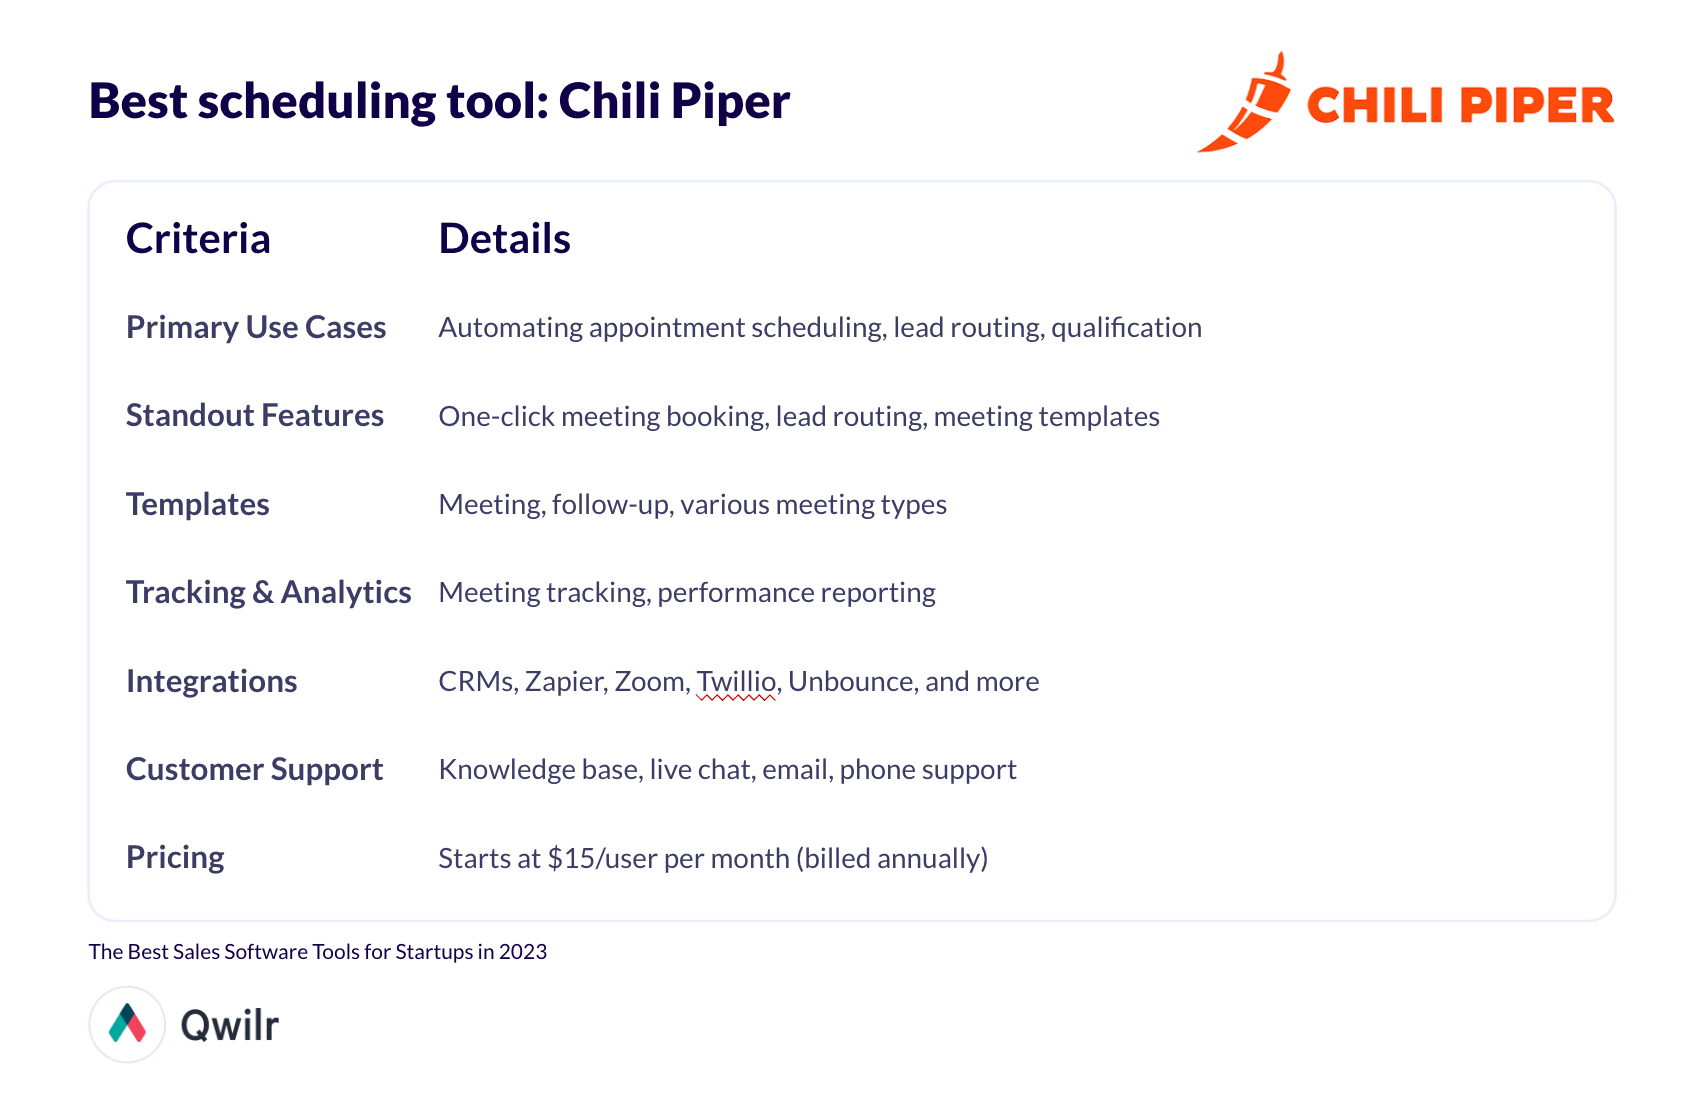 A table summarizing Chili Piper's features